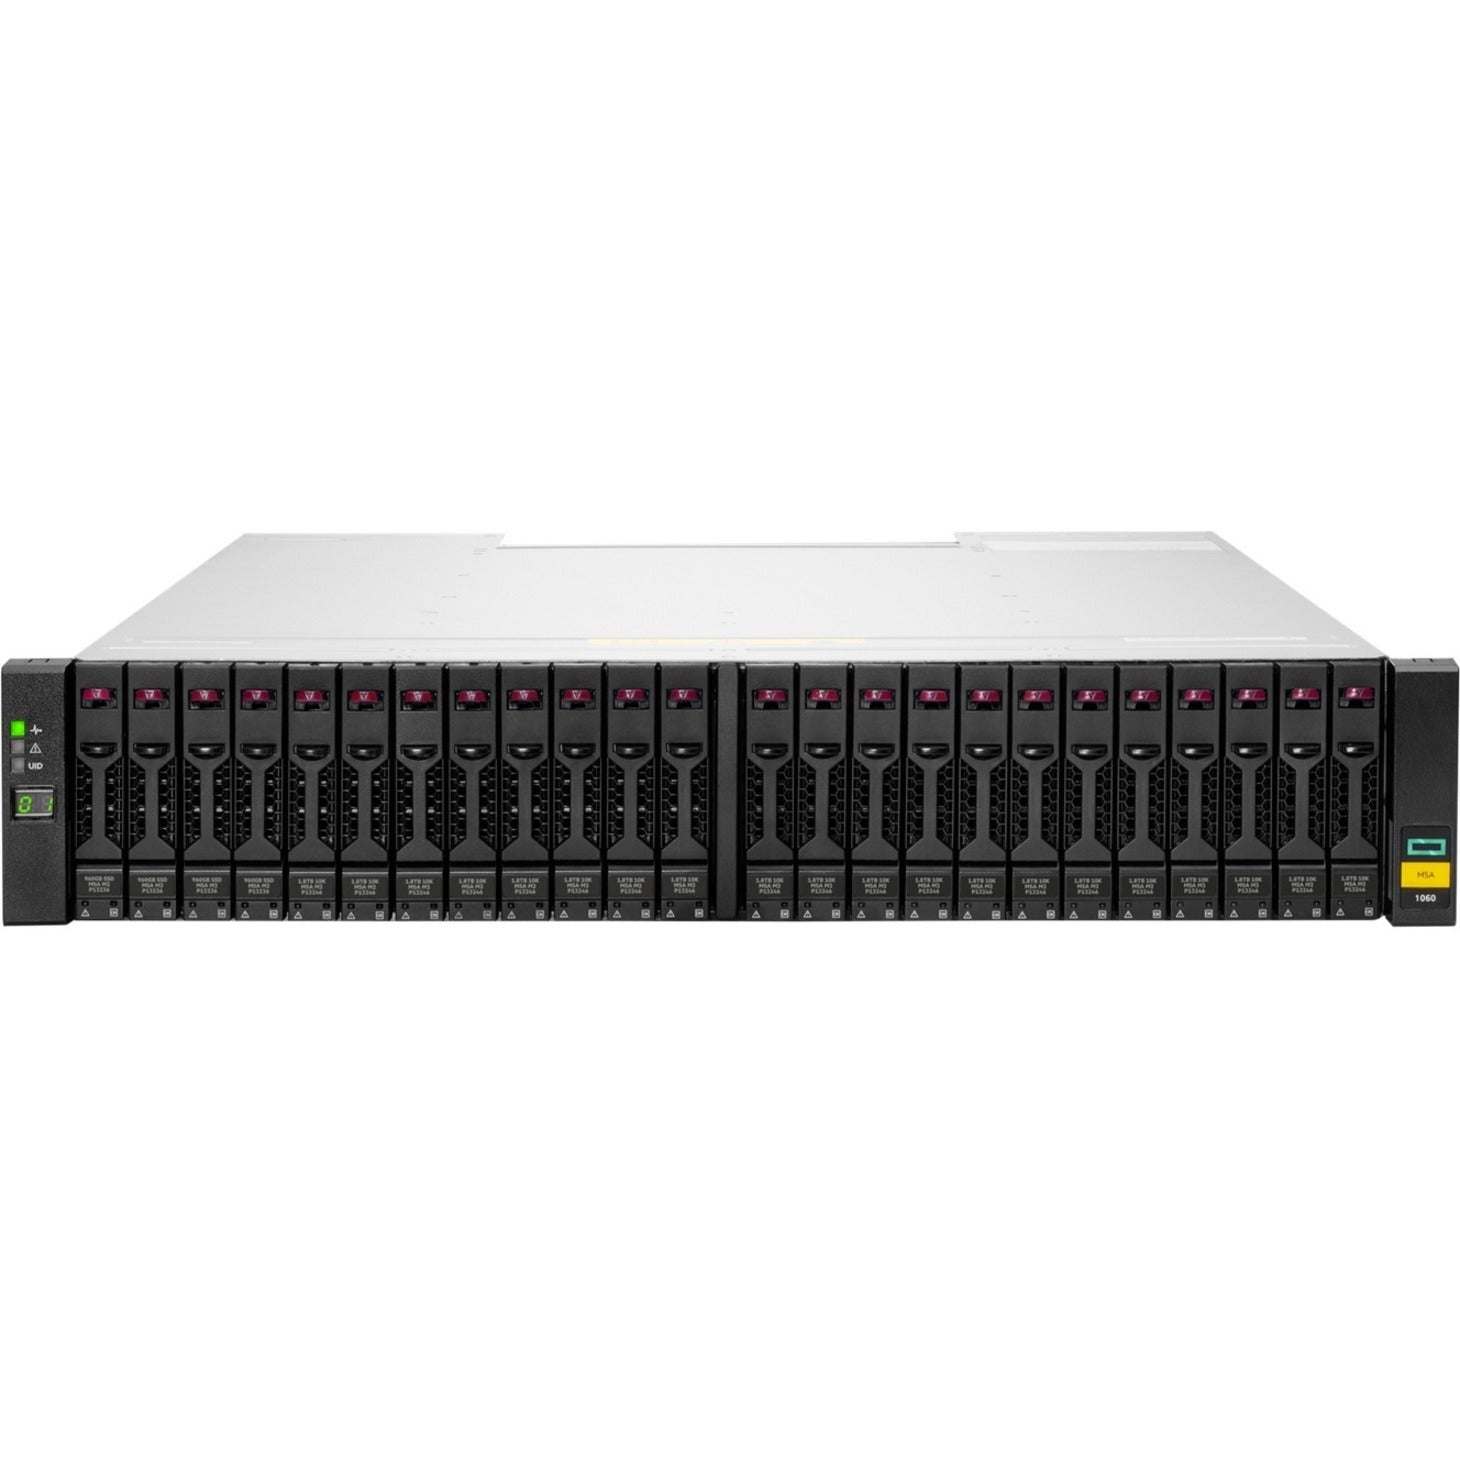 HPE R0Q87B MSA 1060 12Gb SAS SFF Storage, Clustering Supported, 24 Drive Support